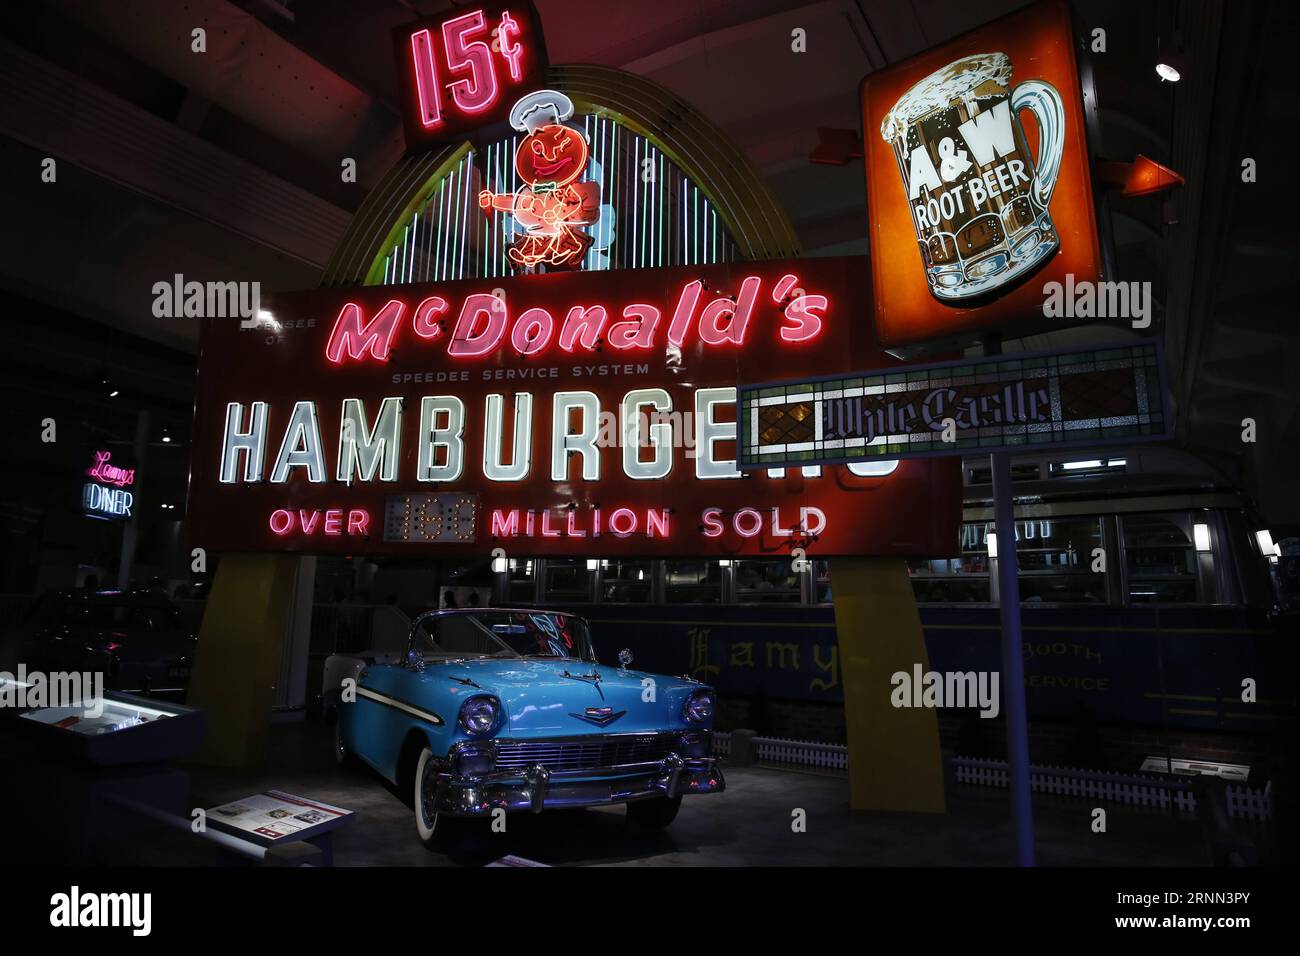 (170623) -- DETROIT, June 23, 2017 -- Photo taken on June 22, 2017 shows a scene of McDonald s car restaurant at the Henry Ford Museum of American Innovation, in Detroit, the United States. Wang Ping) (dtf) U.S.-DETROIT-HENRY FORD MUSEUM wangping PUBLICATIONxNOTxINxCHN   Detroit June 23 2017 Photo Taken ON June 22 2017 Shows a Scene of McDonald S Car Restaurant AT The Henry Ford Museum of American Innovation in Detroit The United States Wang Ping dtf U S Detroit Henry Ford Museum Wangping PUBLICATIONxNOTxINxCHN Stock Photo